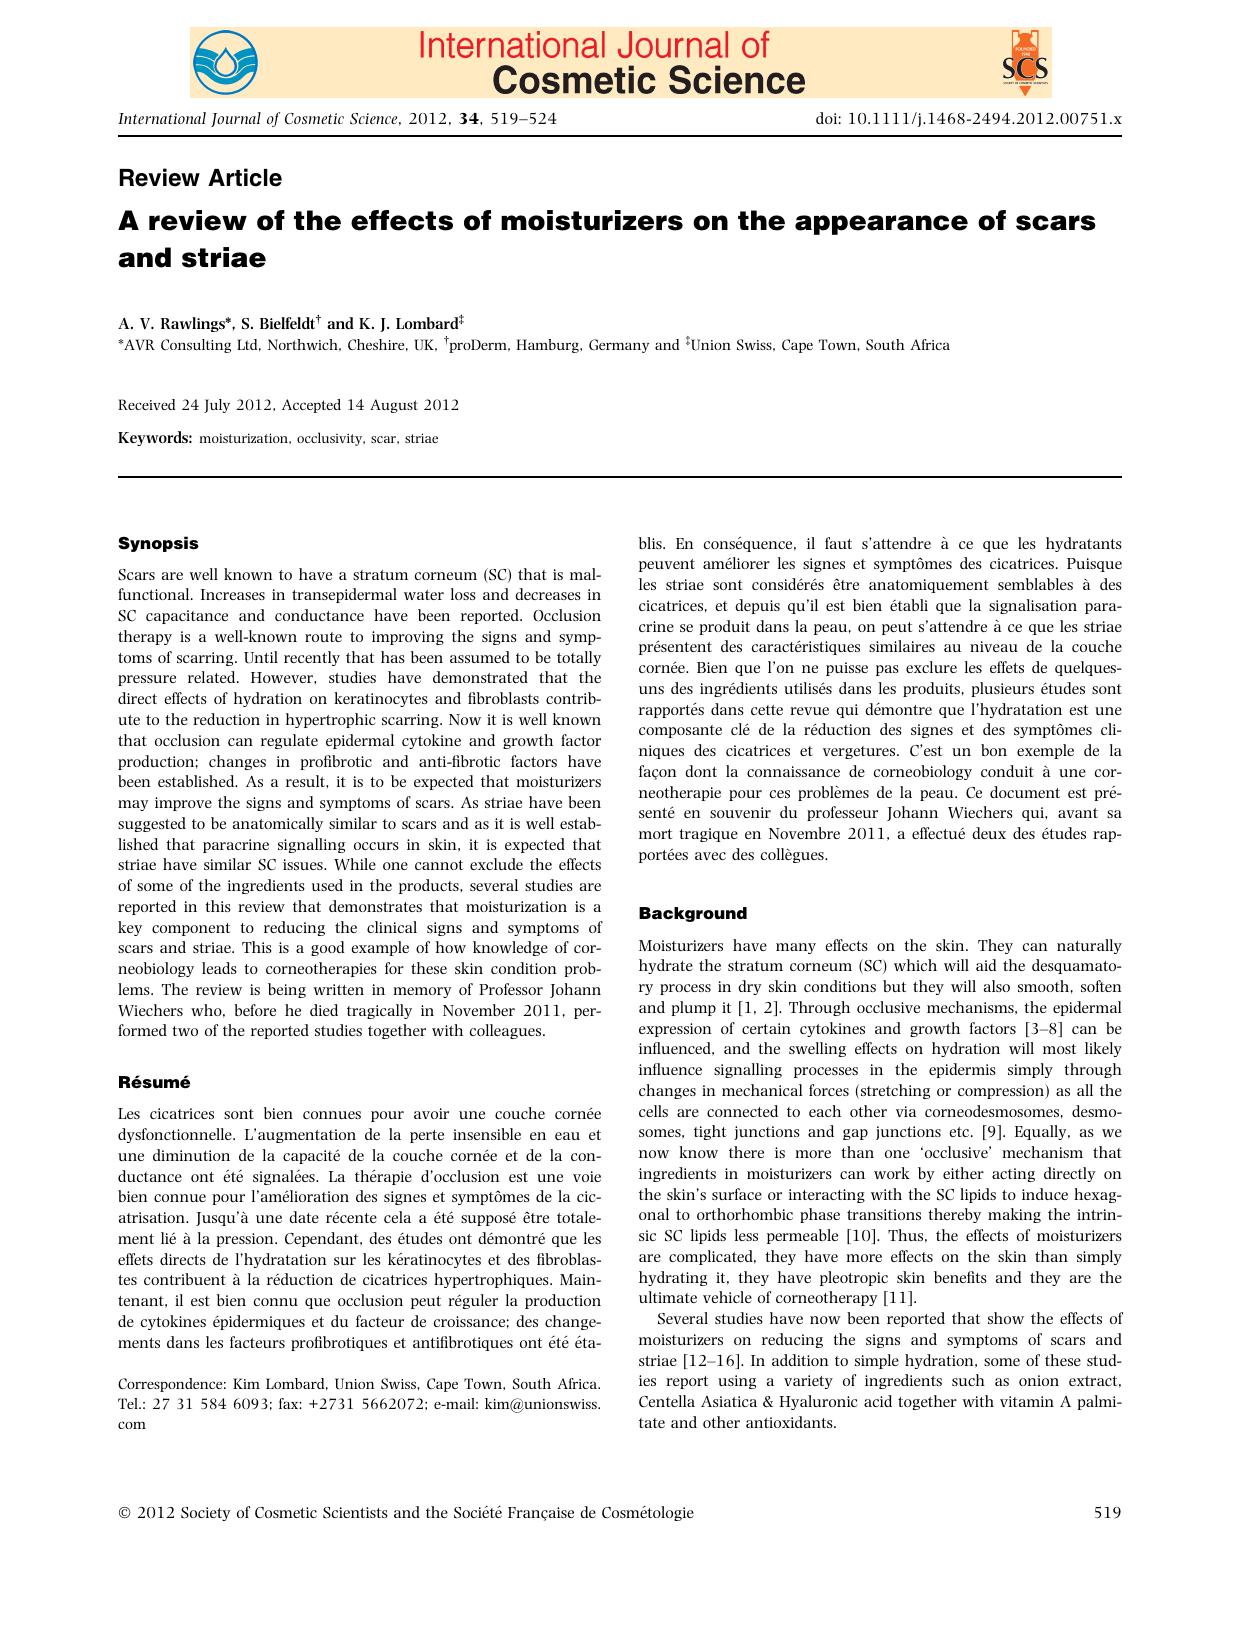 A review of the effects of moisturizers on the appearance of scars and striae by Unknown